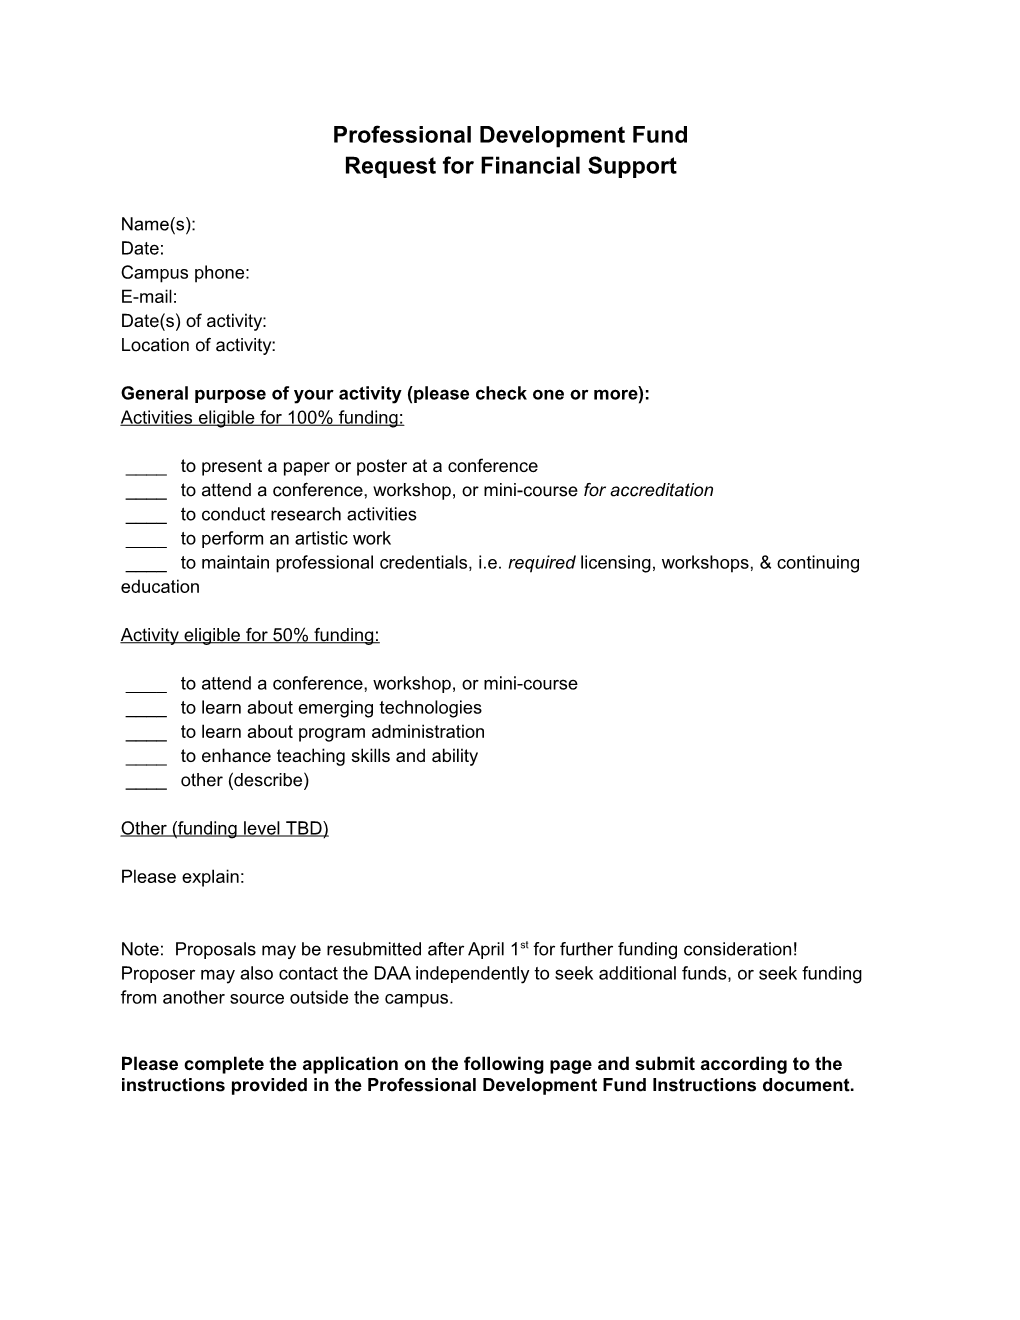 Request for Financial Support